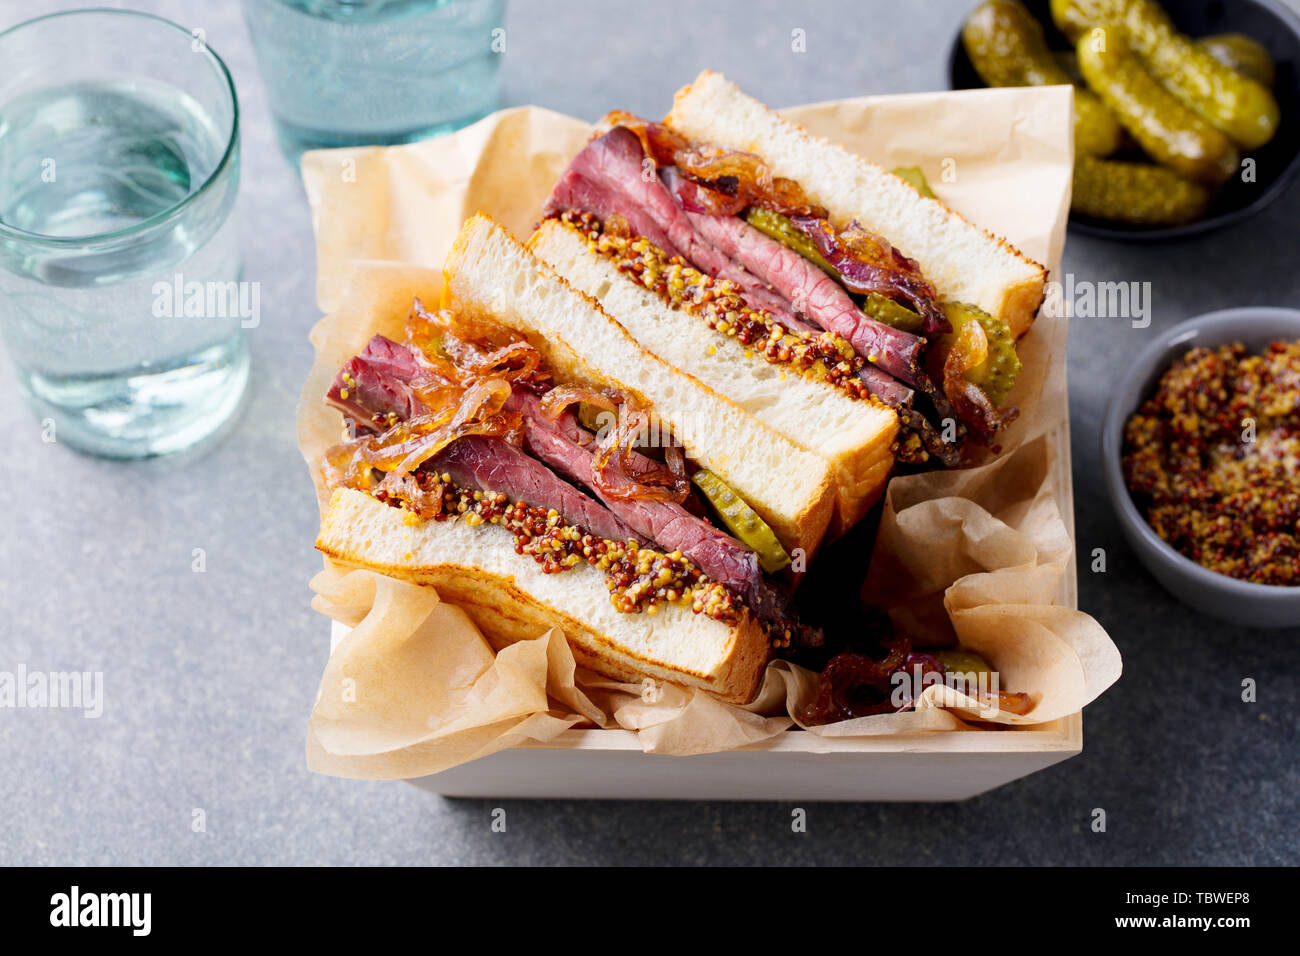 Sandwich with roast beef in wooden box. Top view. Stock Photo